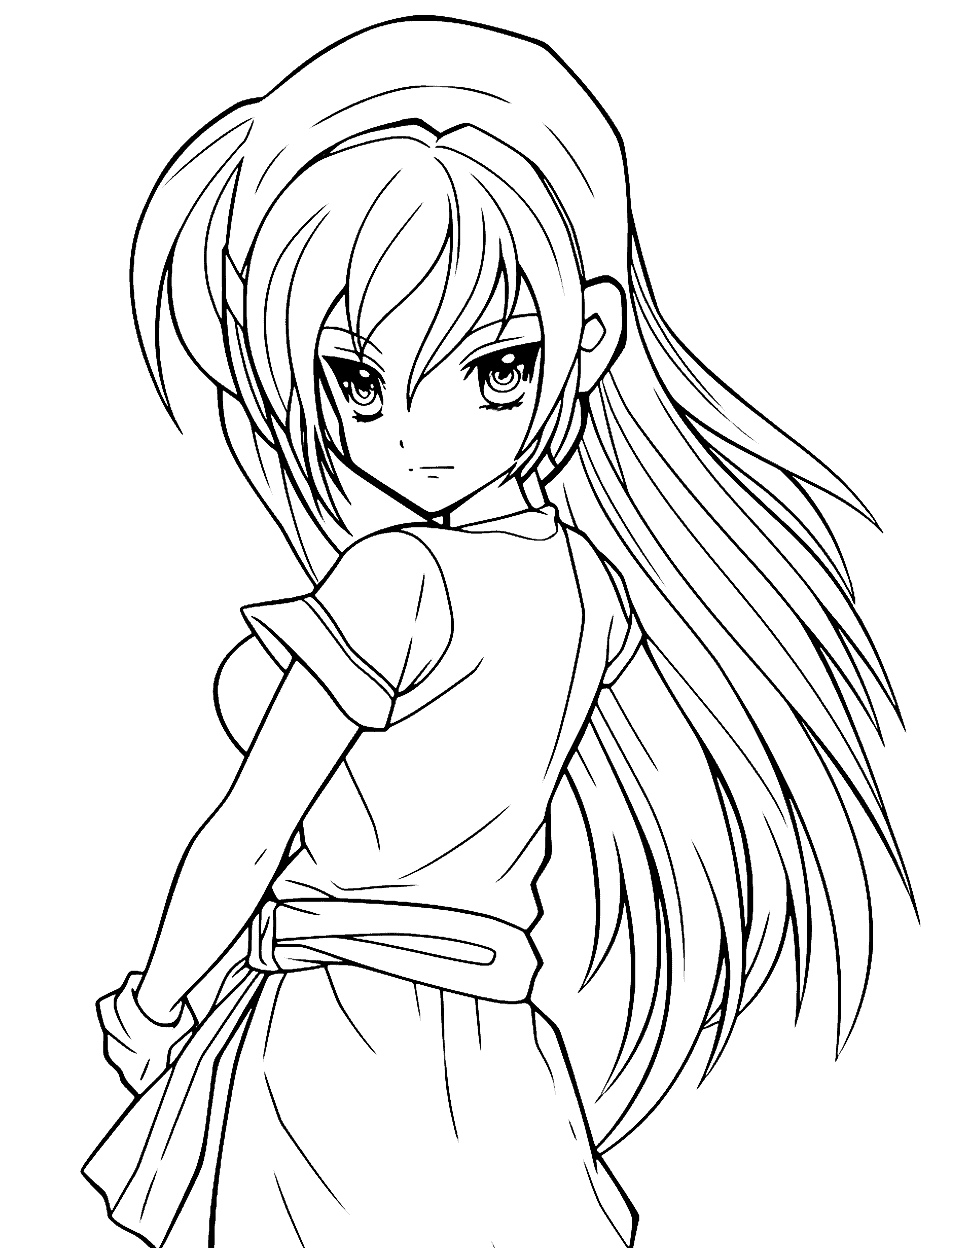 Long-Haired Anime Girl Coloring Page - A beautiful anime girl with long, flowing hair, with different elements to color in her hair.